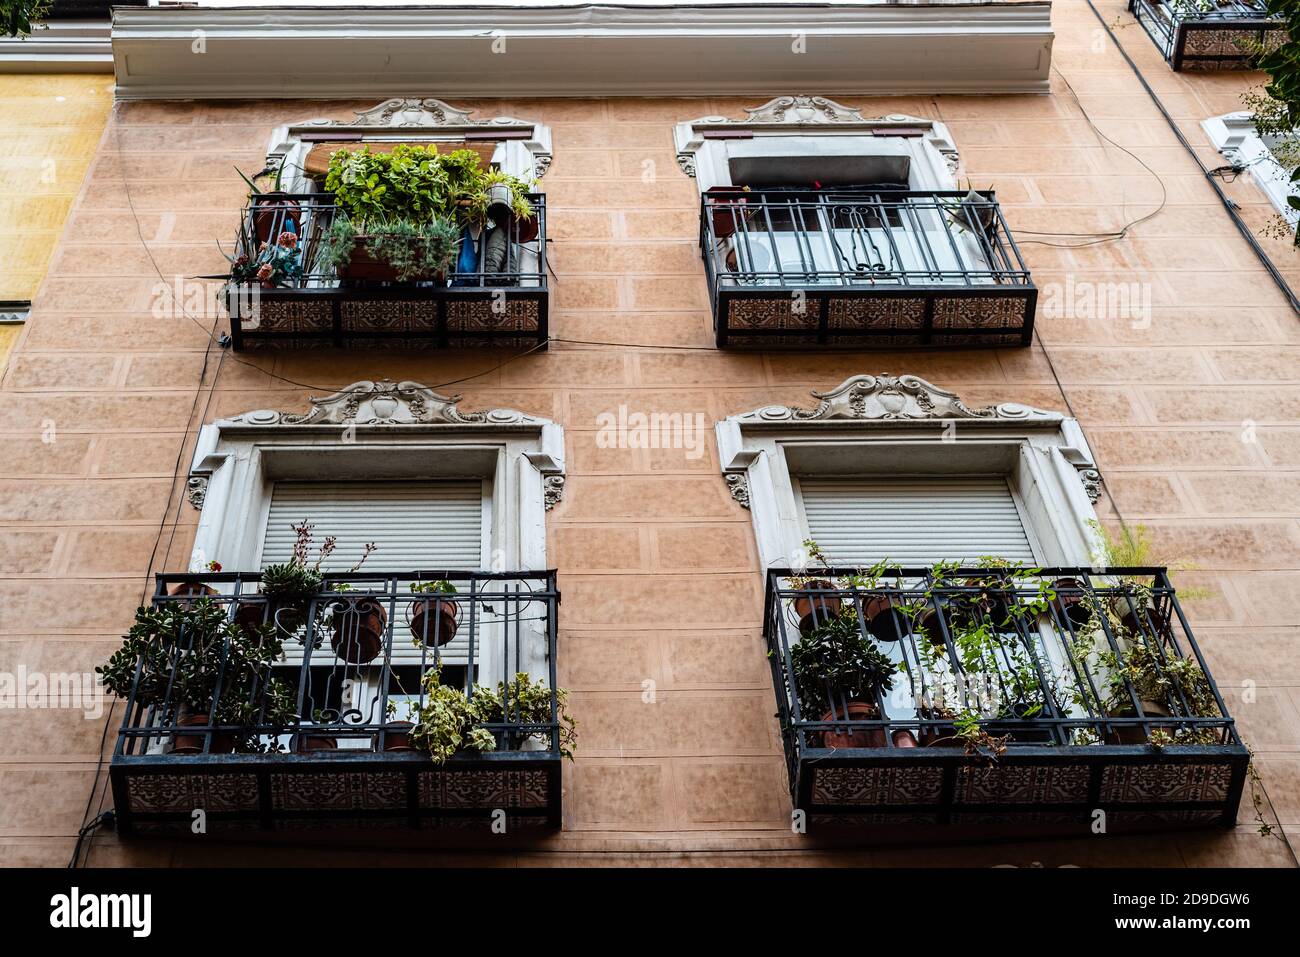 Low angle view of traditional cast iron balconies of old residential building in Lavapies quarter in central Madrid Stock Photo